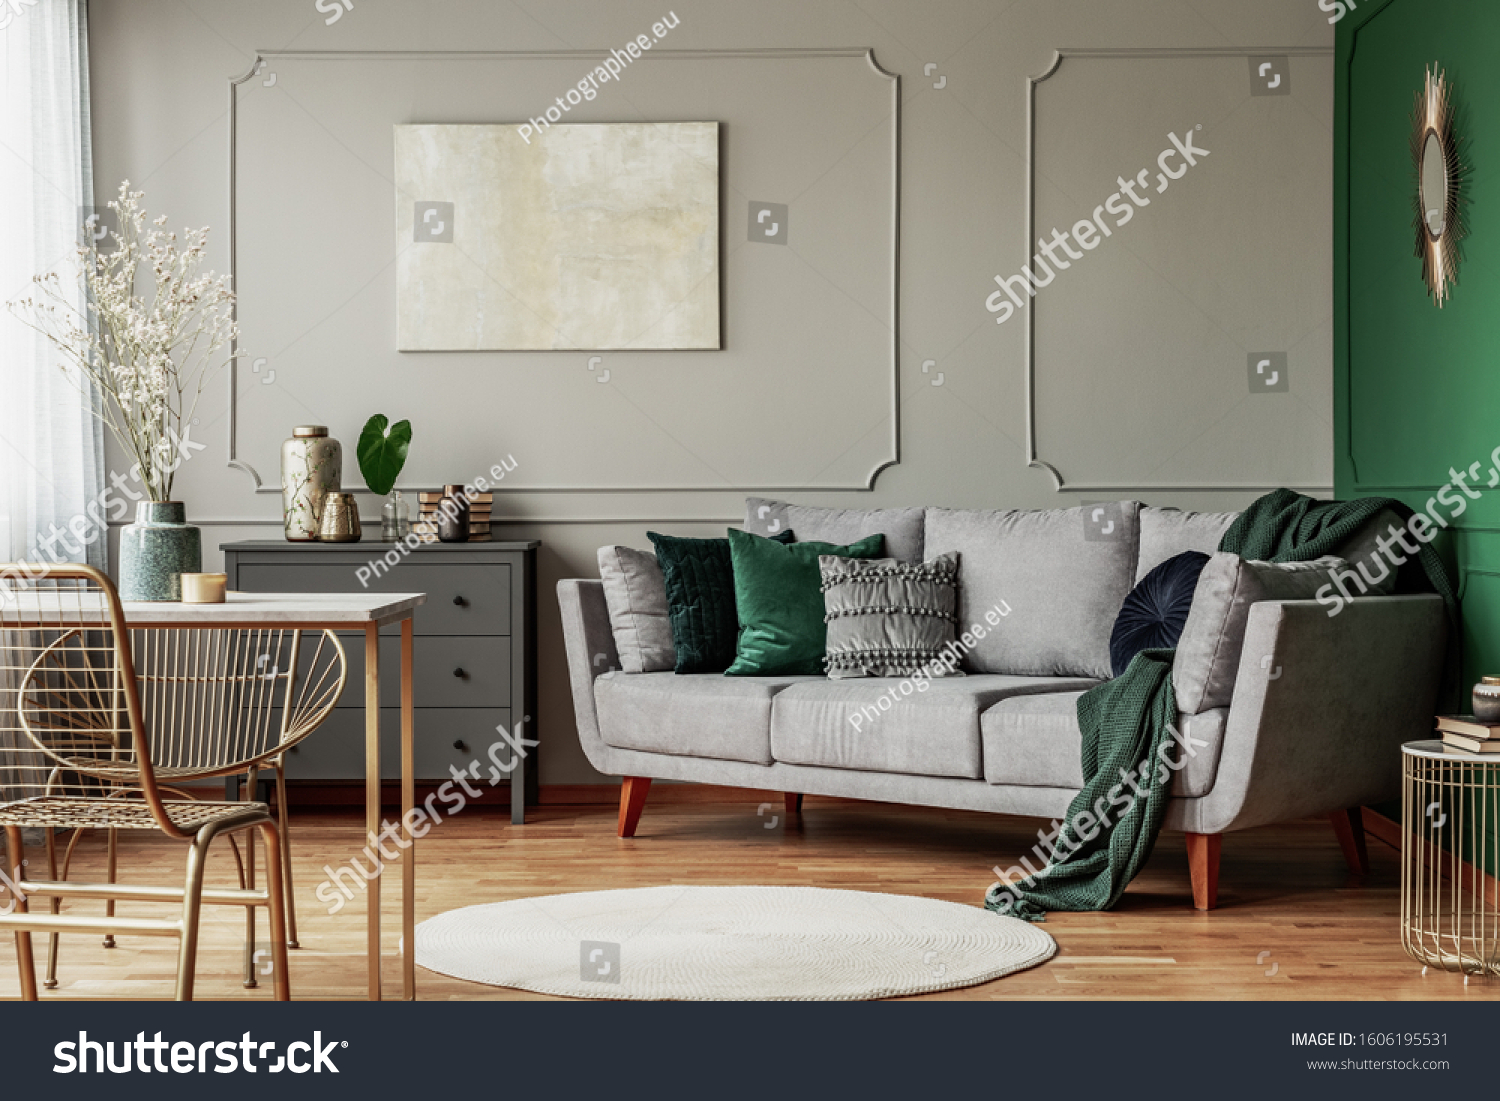 Stylish emerald green and grey living room interior design with abstract painting on the wall #1606195531